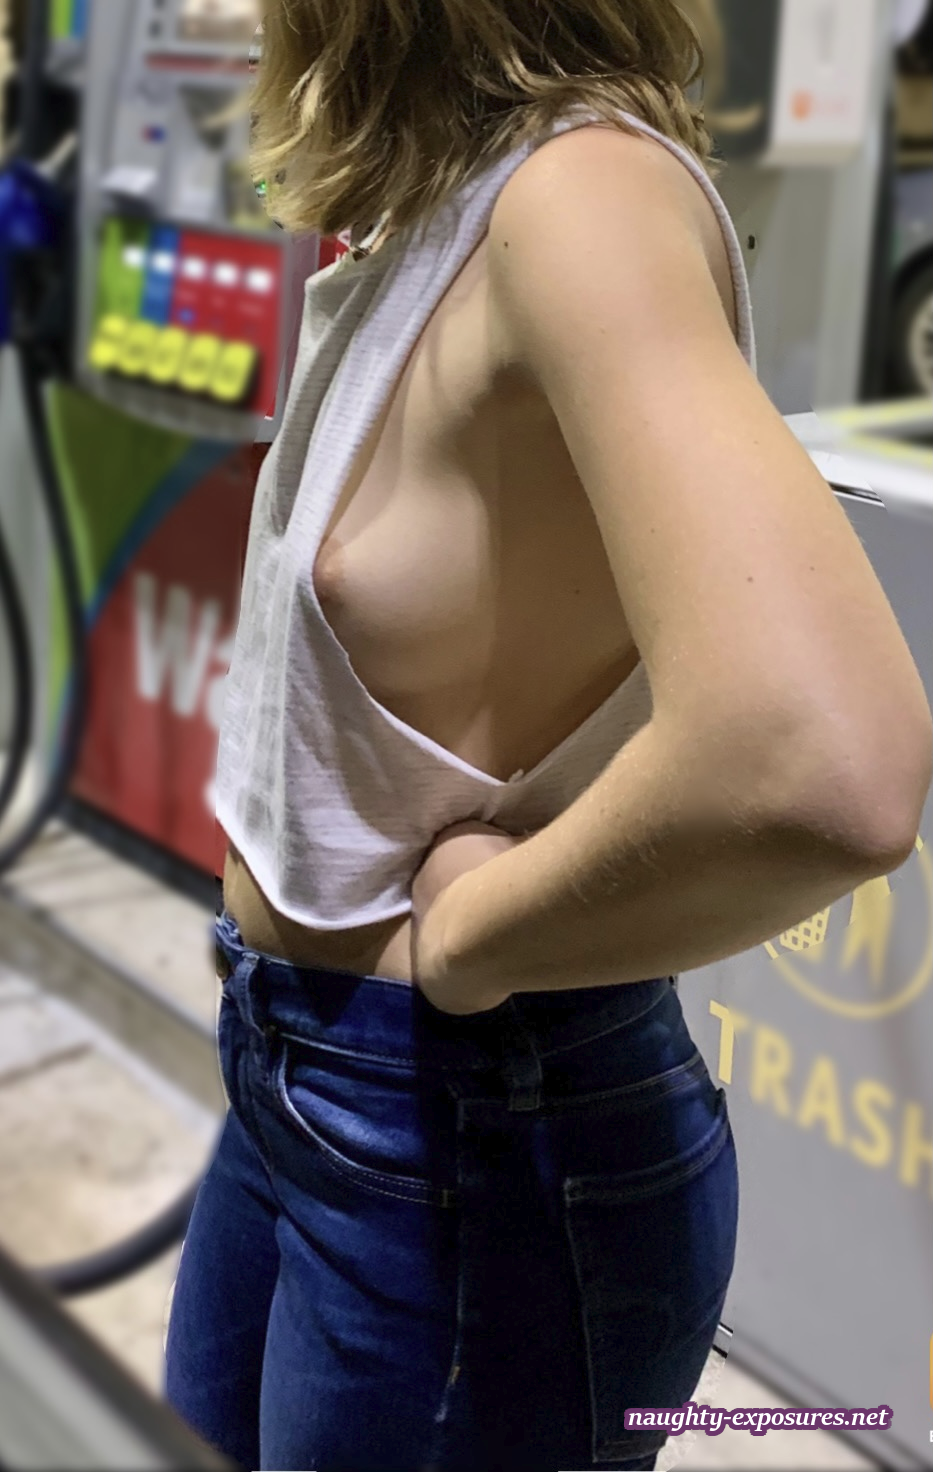 Braless girls out in public